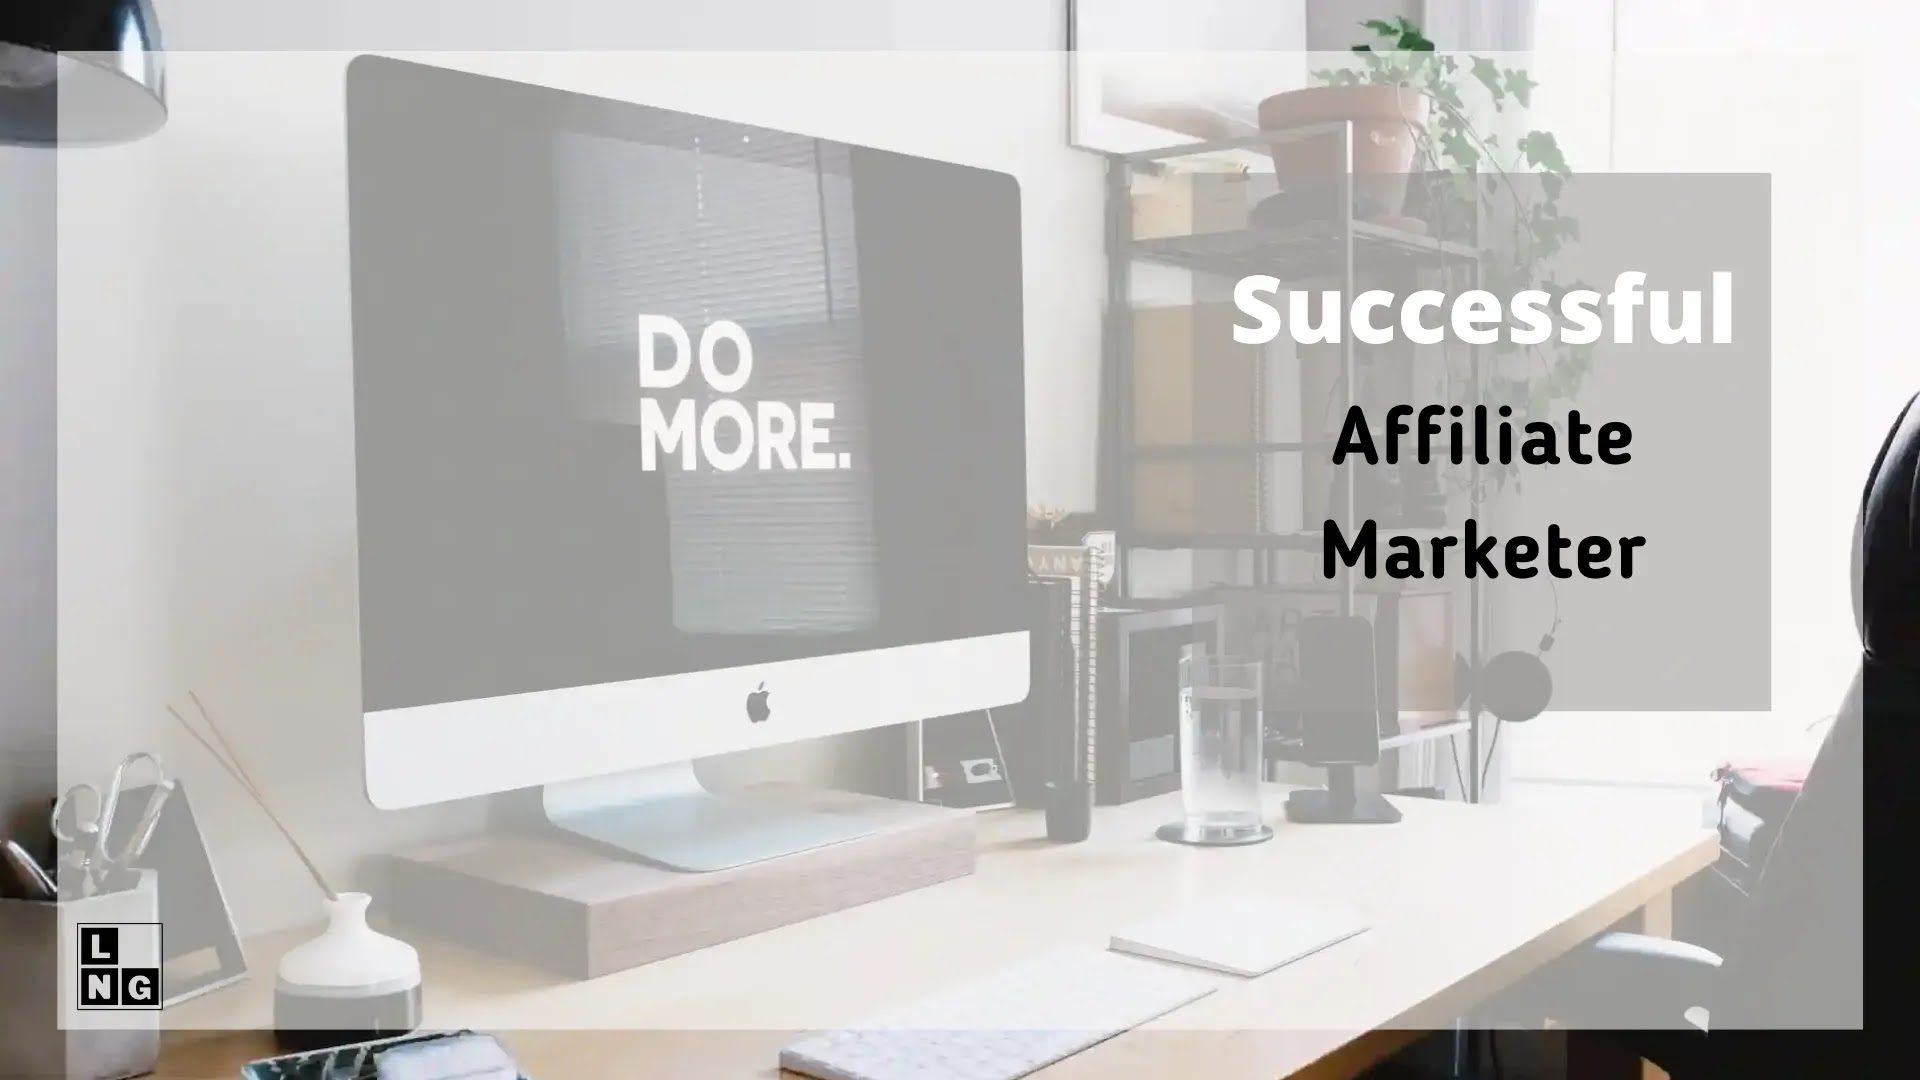 10 Tips to be a Successful Affiliate Marketer for BEGINNERS